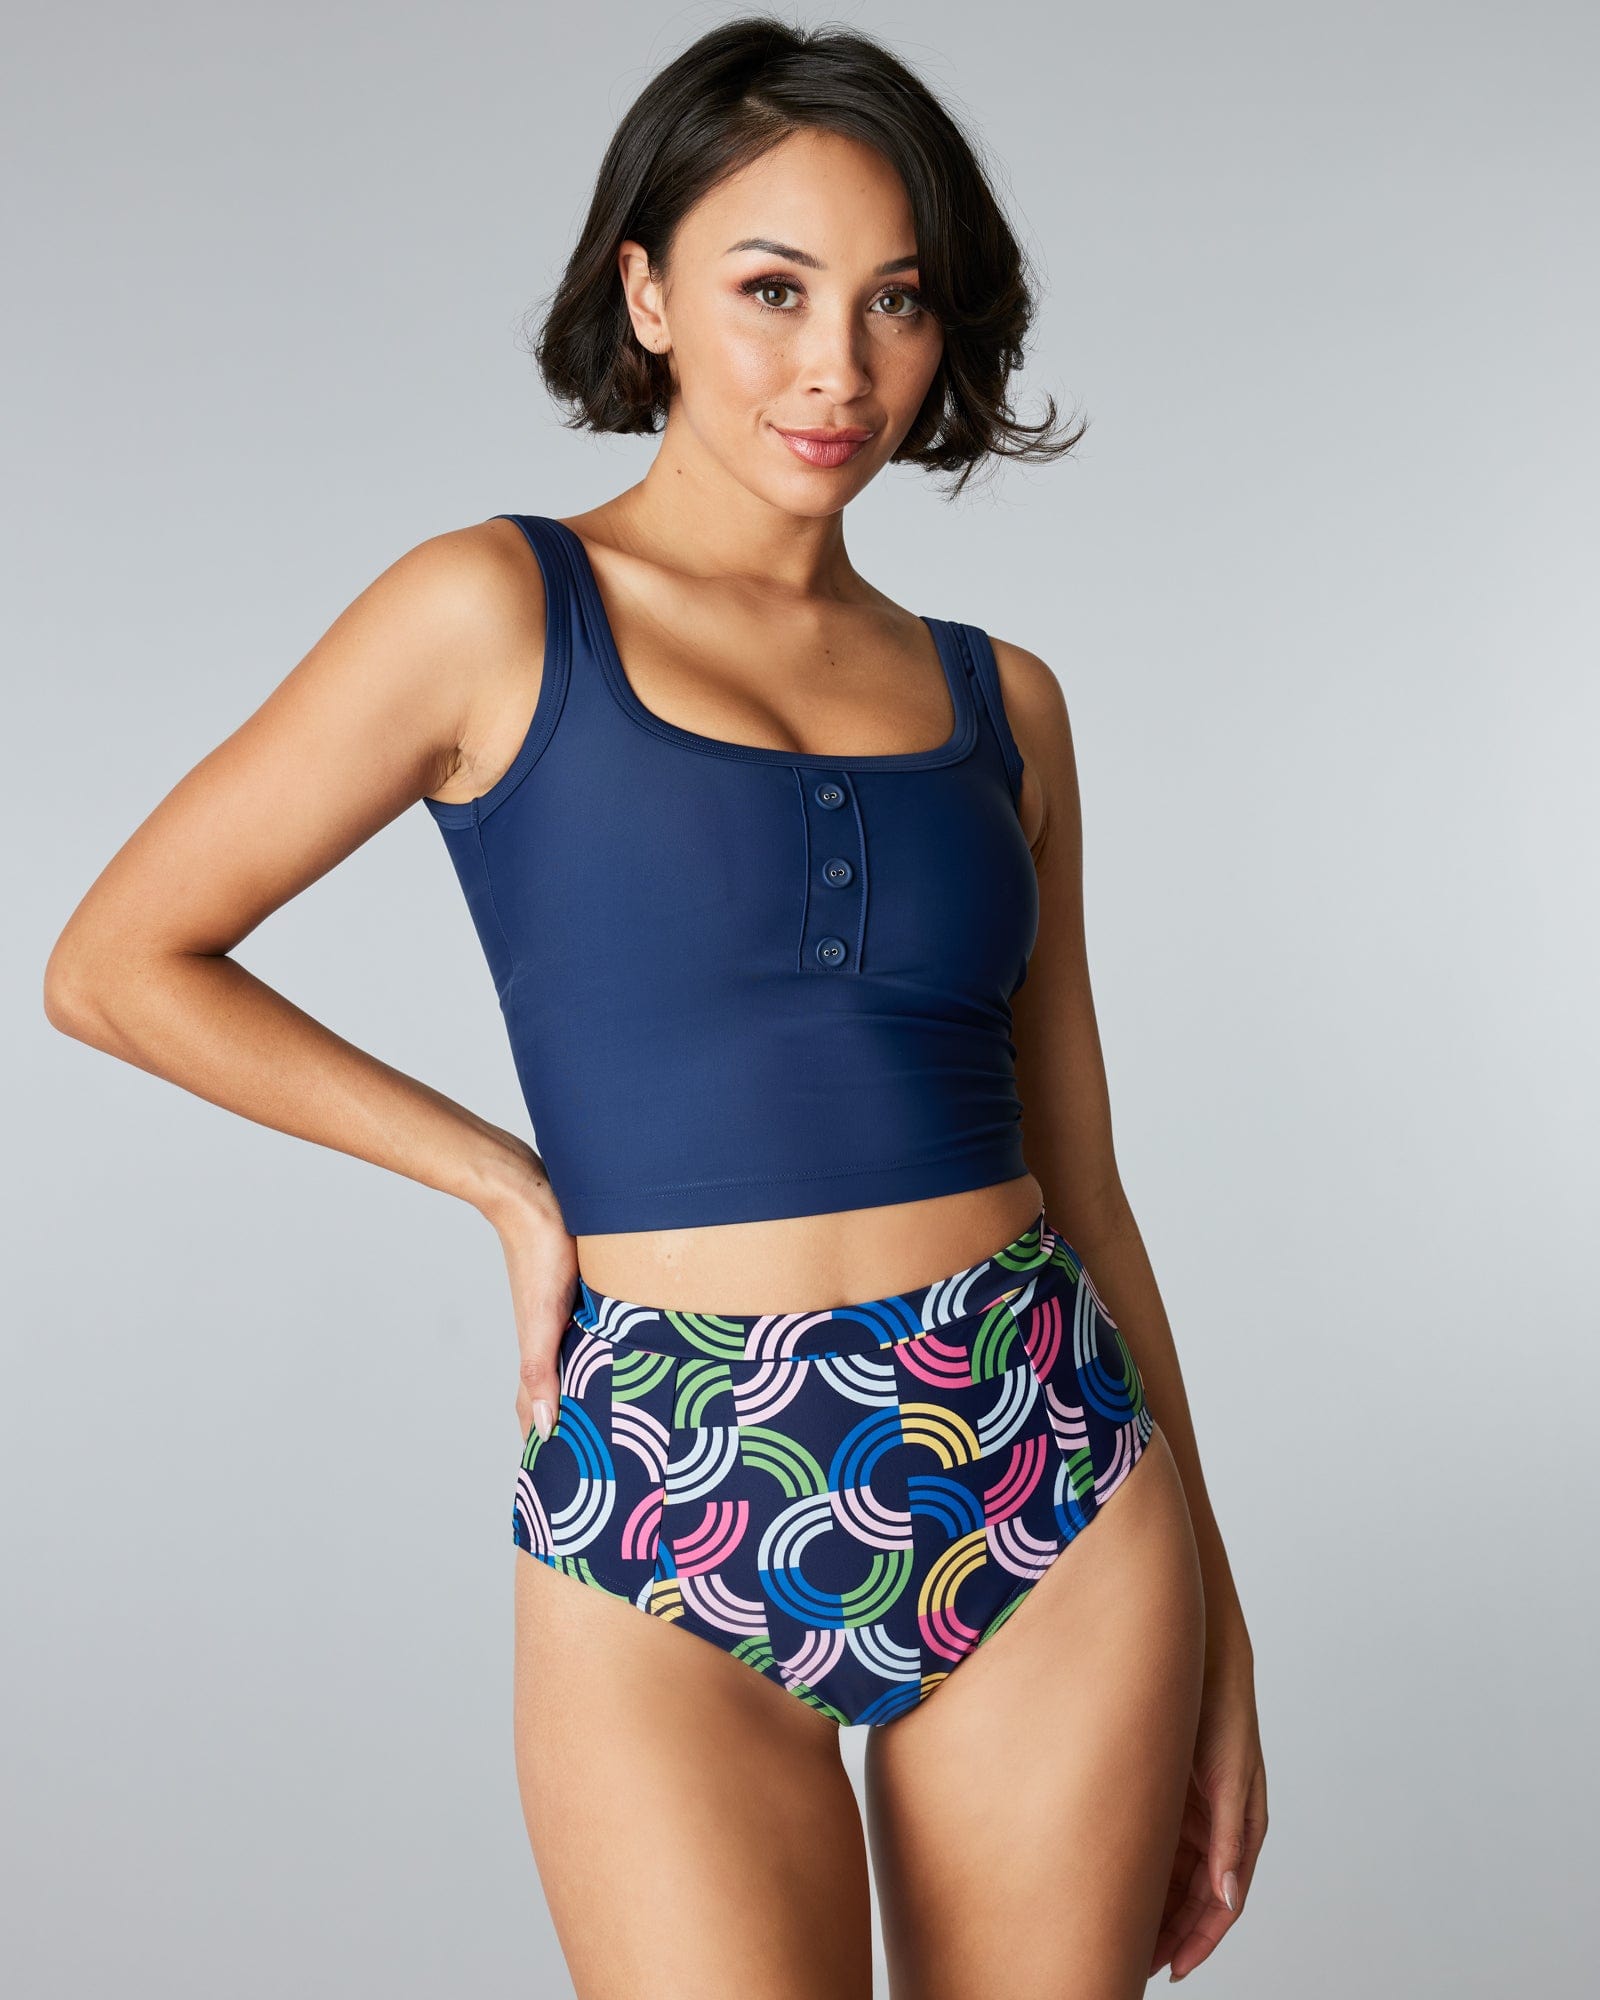 Woman in a two-piece swimsuit with a rainbow print and patterned top & bottom.